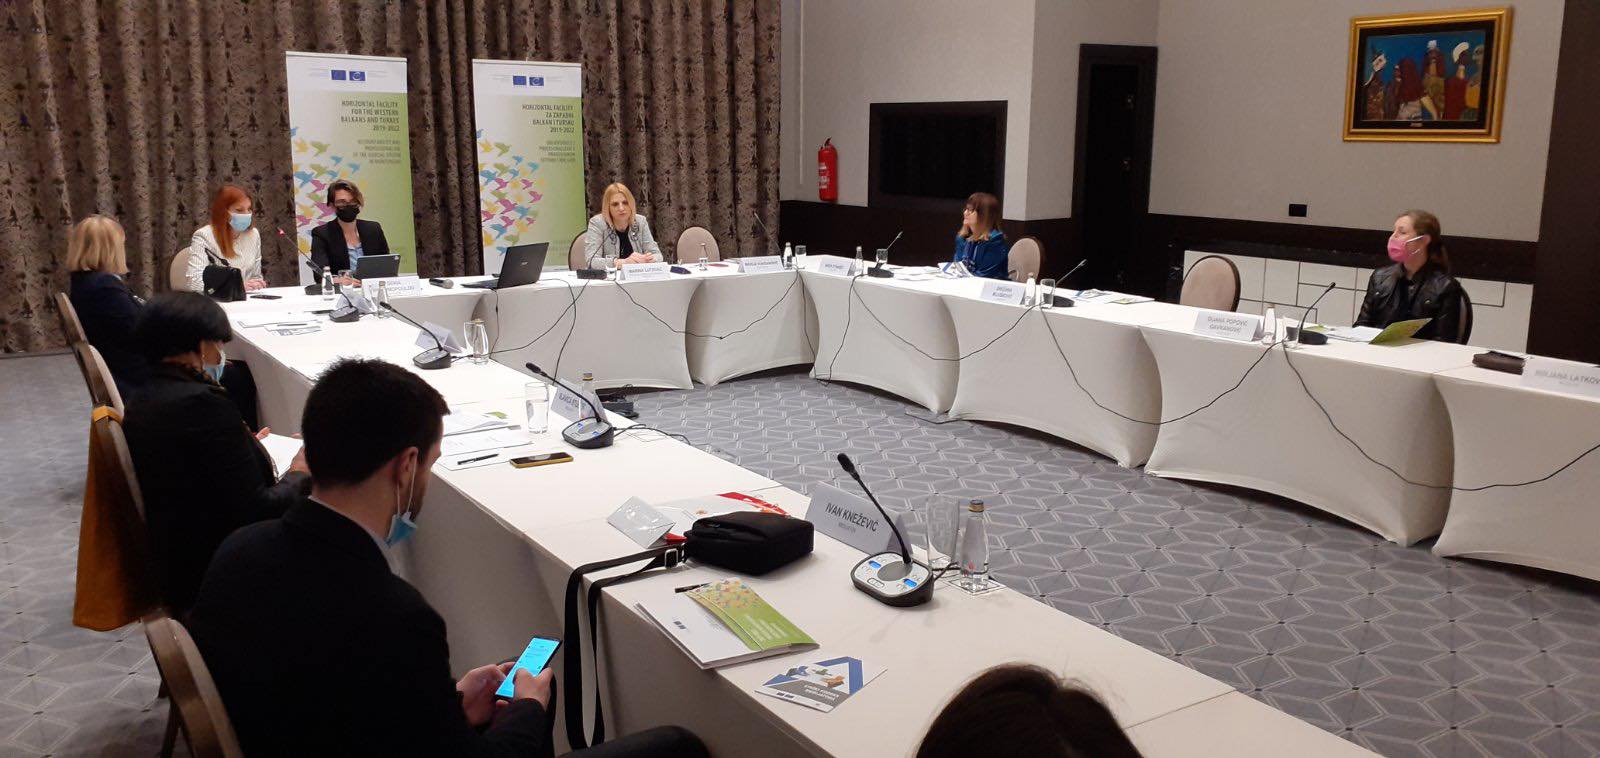 Workshops on ethics in mediation and family mediation organised in Montenegro